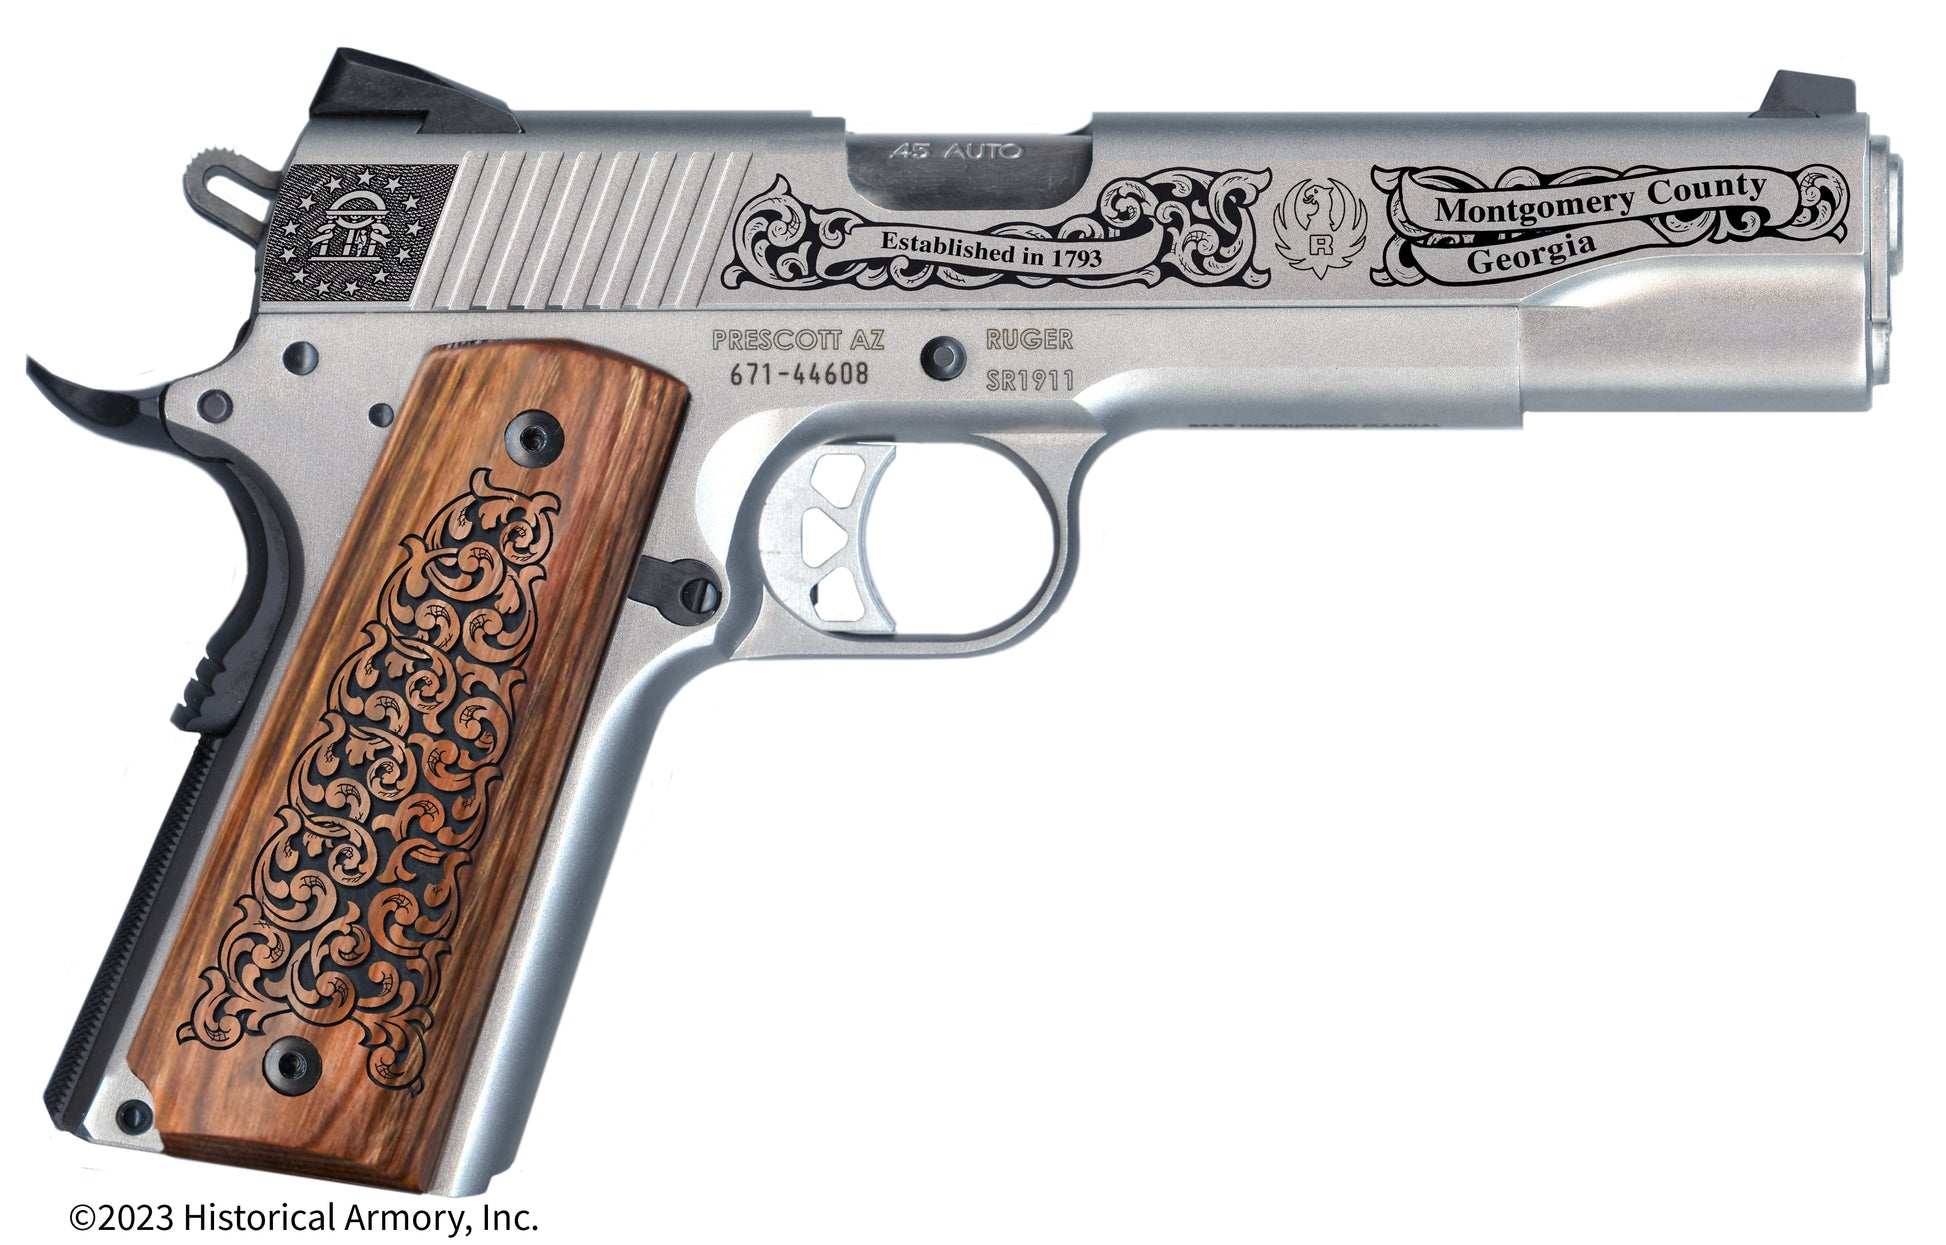 Montgomery County Georgia Personalized Engraved .45 Auto Ruger 1911